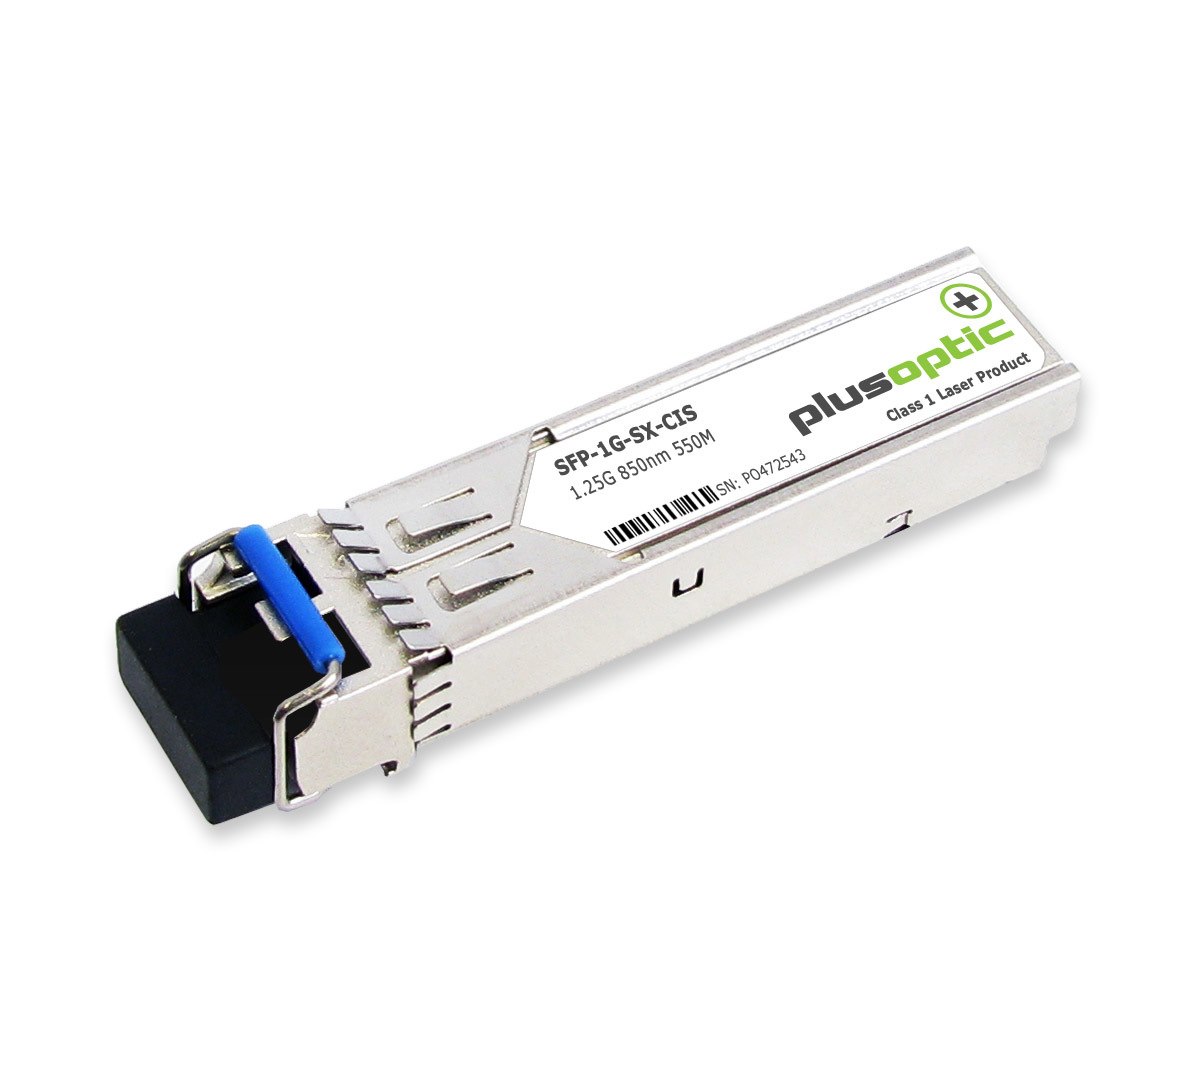 PlusOptic Cisco Compatible (GLC-SX-MM GLC-SX-MMD Ons-Sc-Ge-Sx Sfp-Ge-S) 1.25G, SFP, 850NM, 550M Transceiver, LC Connector For MMF With Dom | PlusOptic Sfp-1G-Sx-Cis